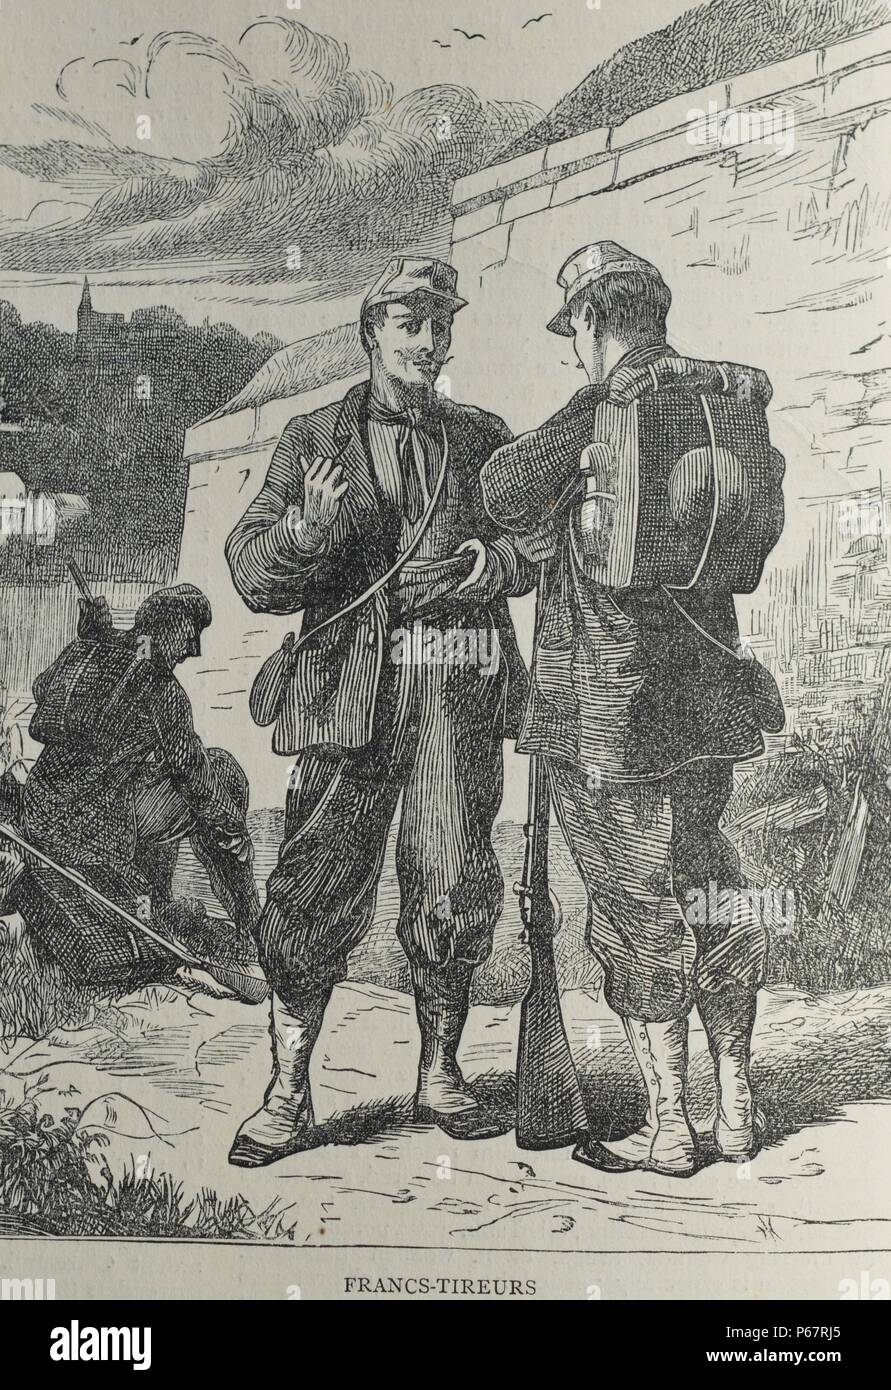 Engraving of Francs-Tireurs free shooters. Dated 1870 Stock Photo